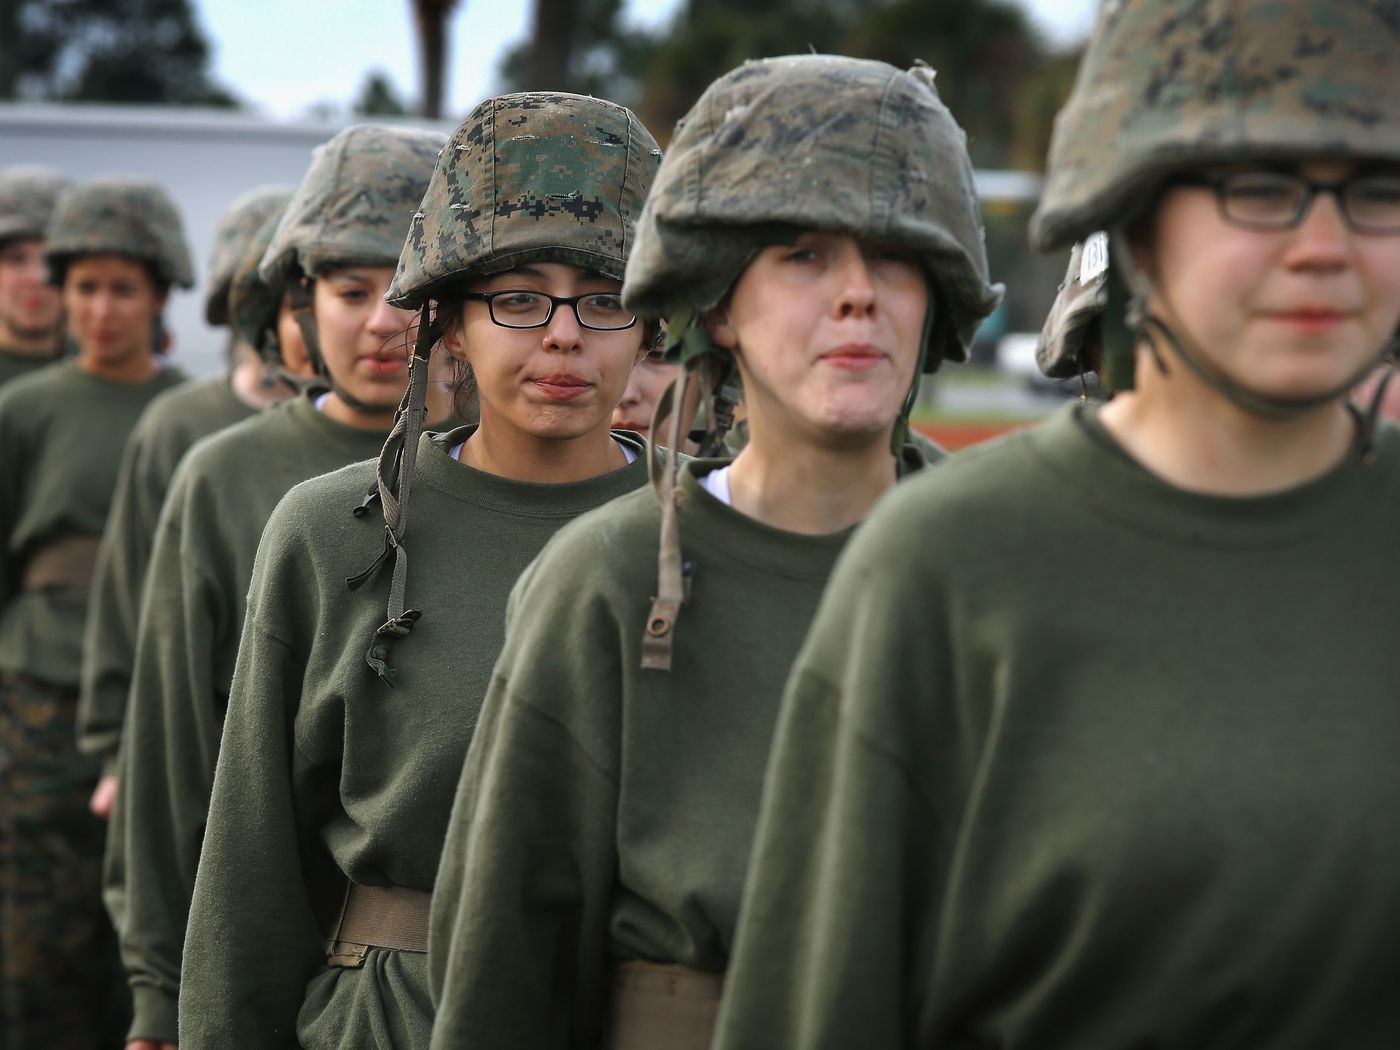 I was a Marine. I can't be silent about the sexual harassment I faced anymore